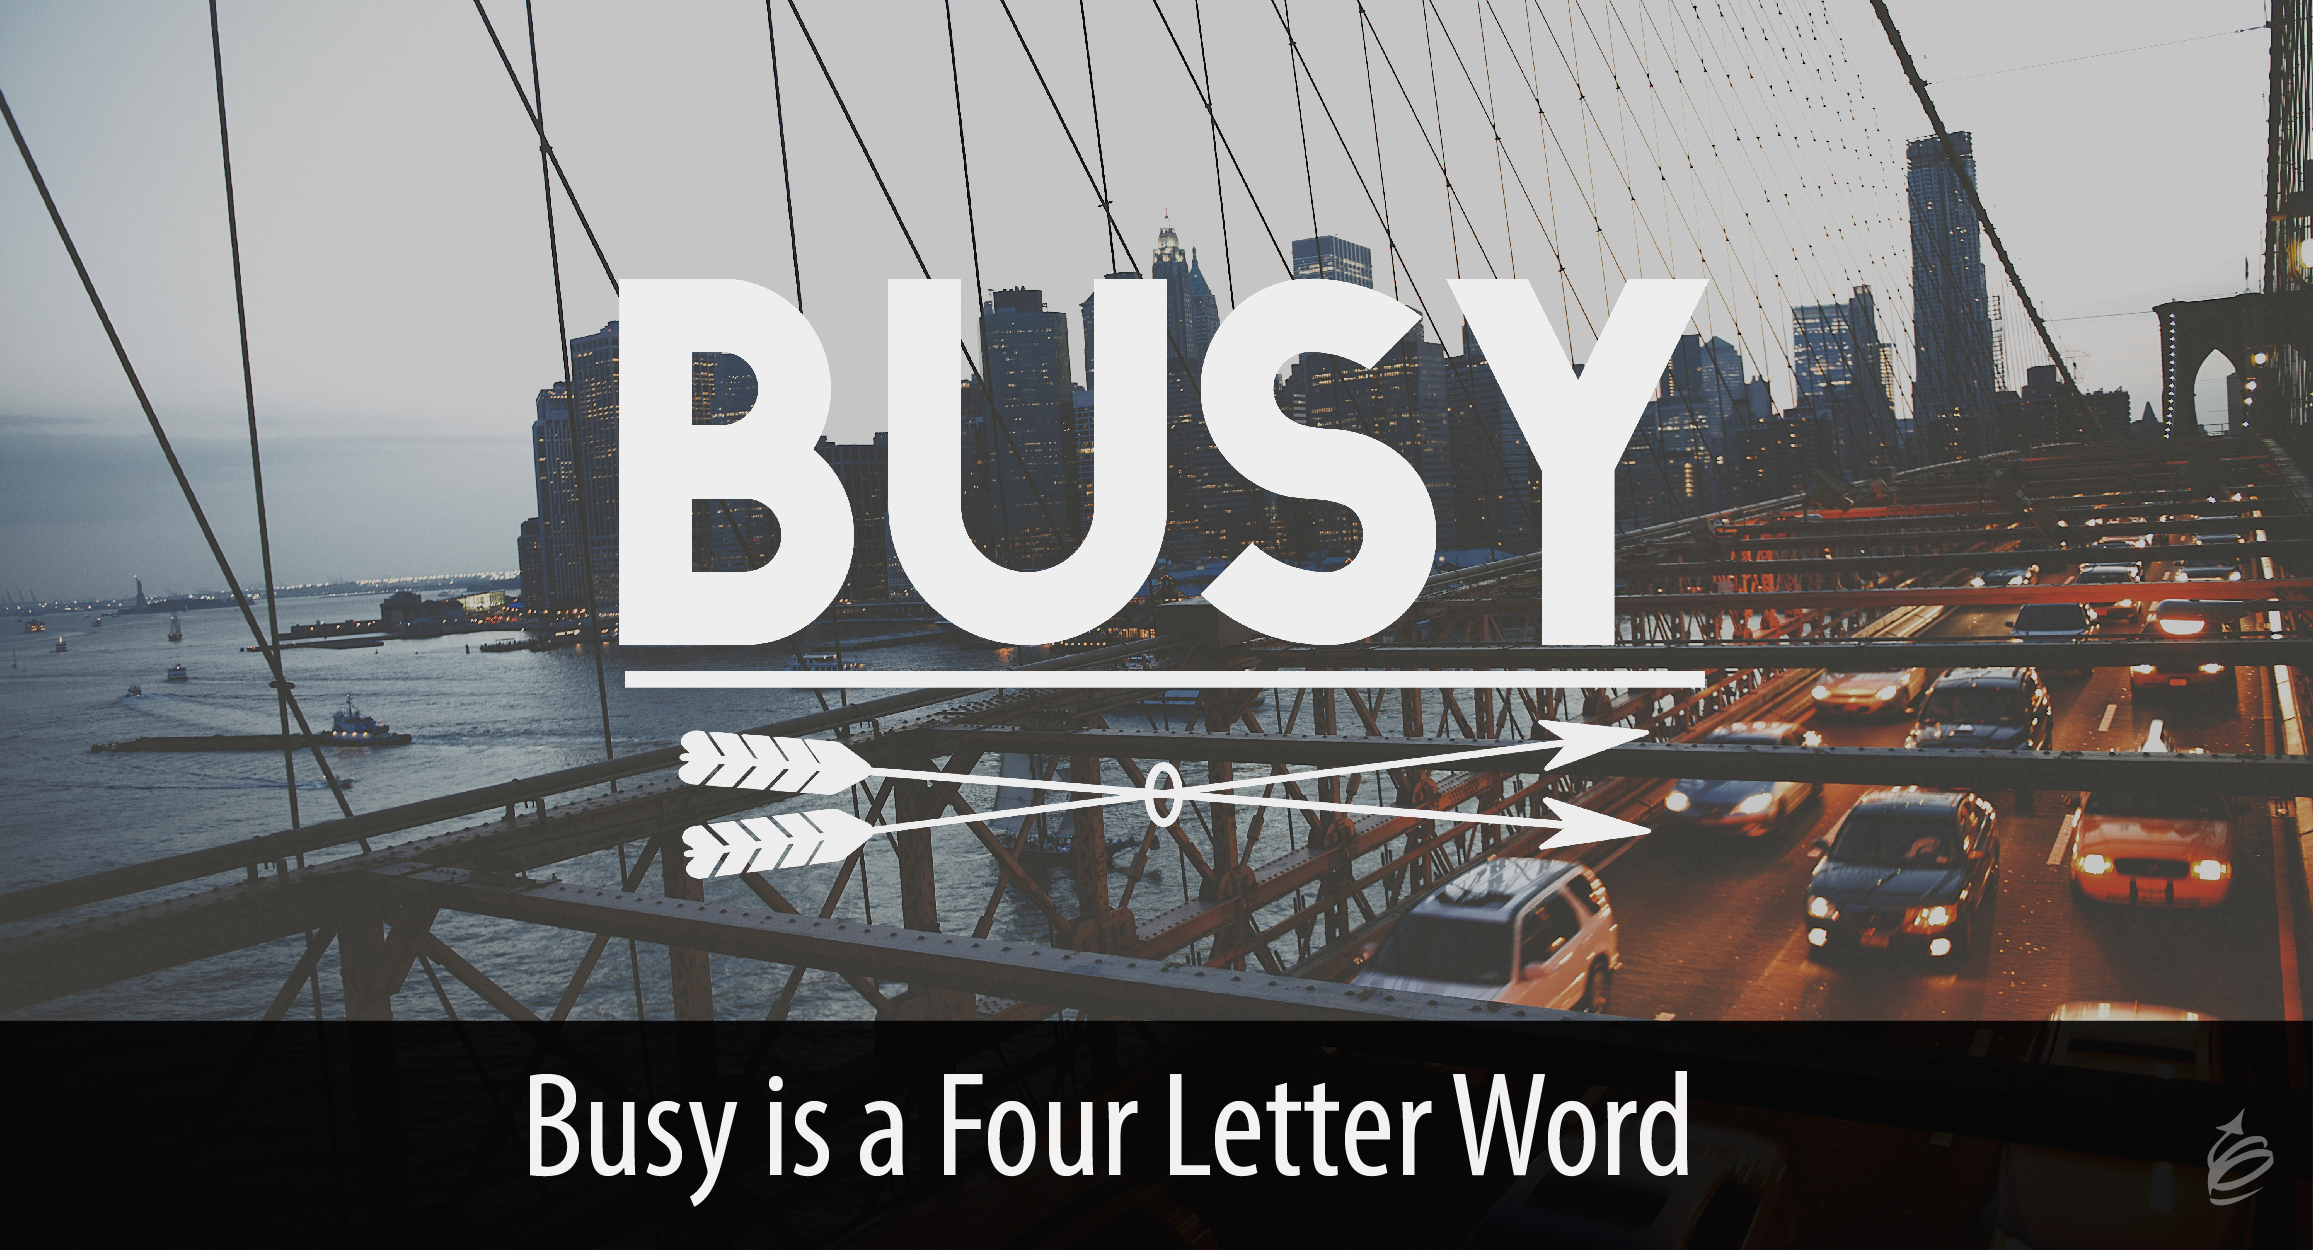 Busy isn't what you want